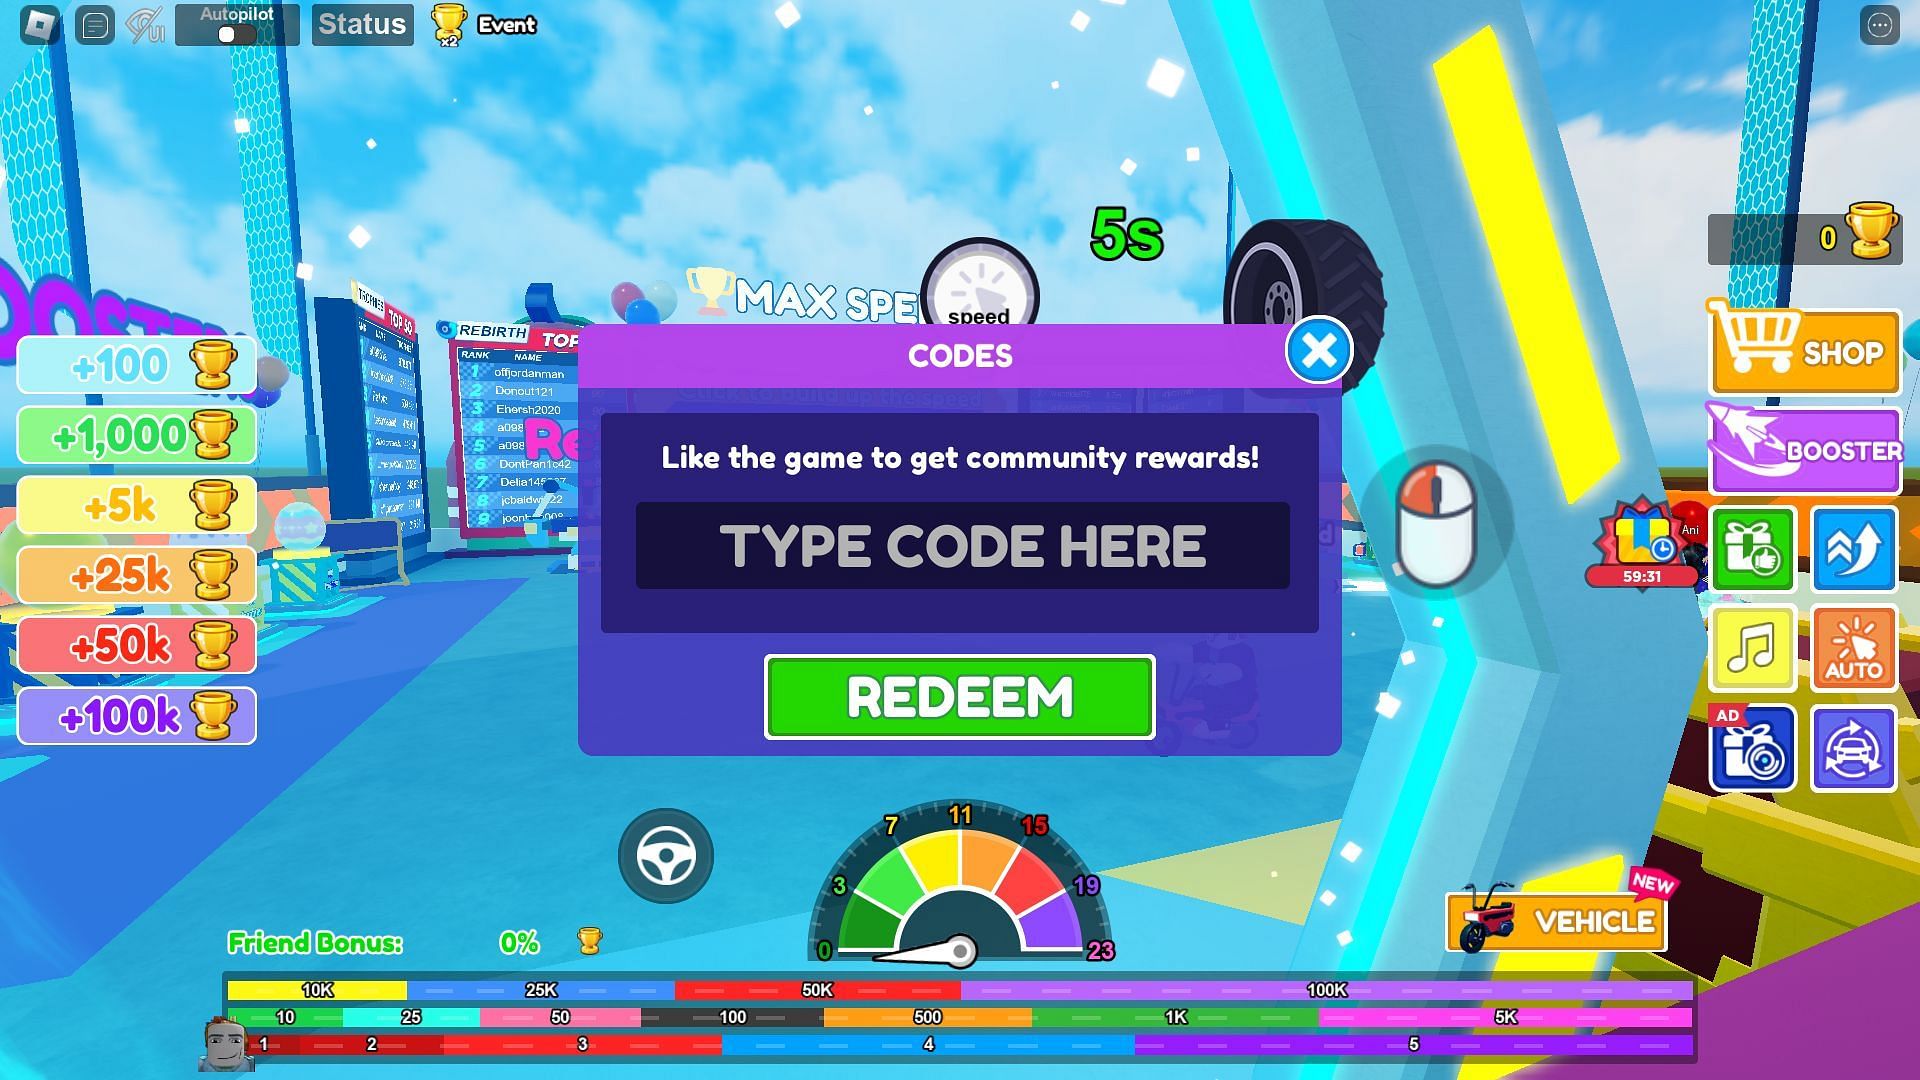 Active codes for Max Speed (Image via Roblox)